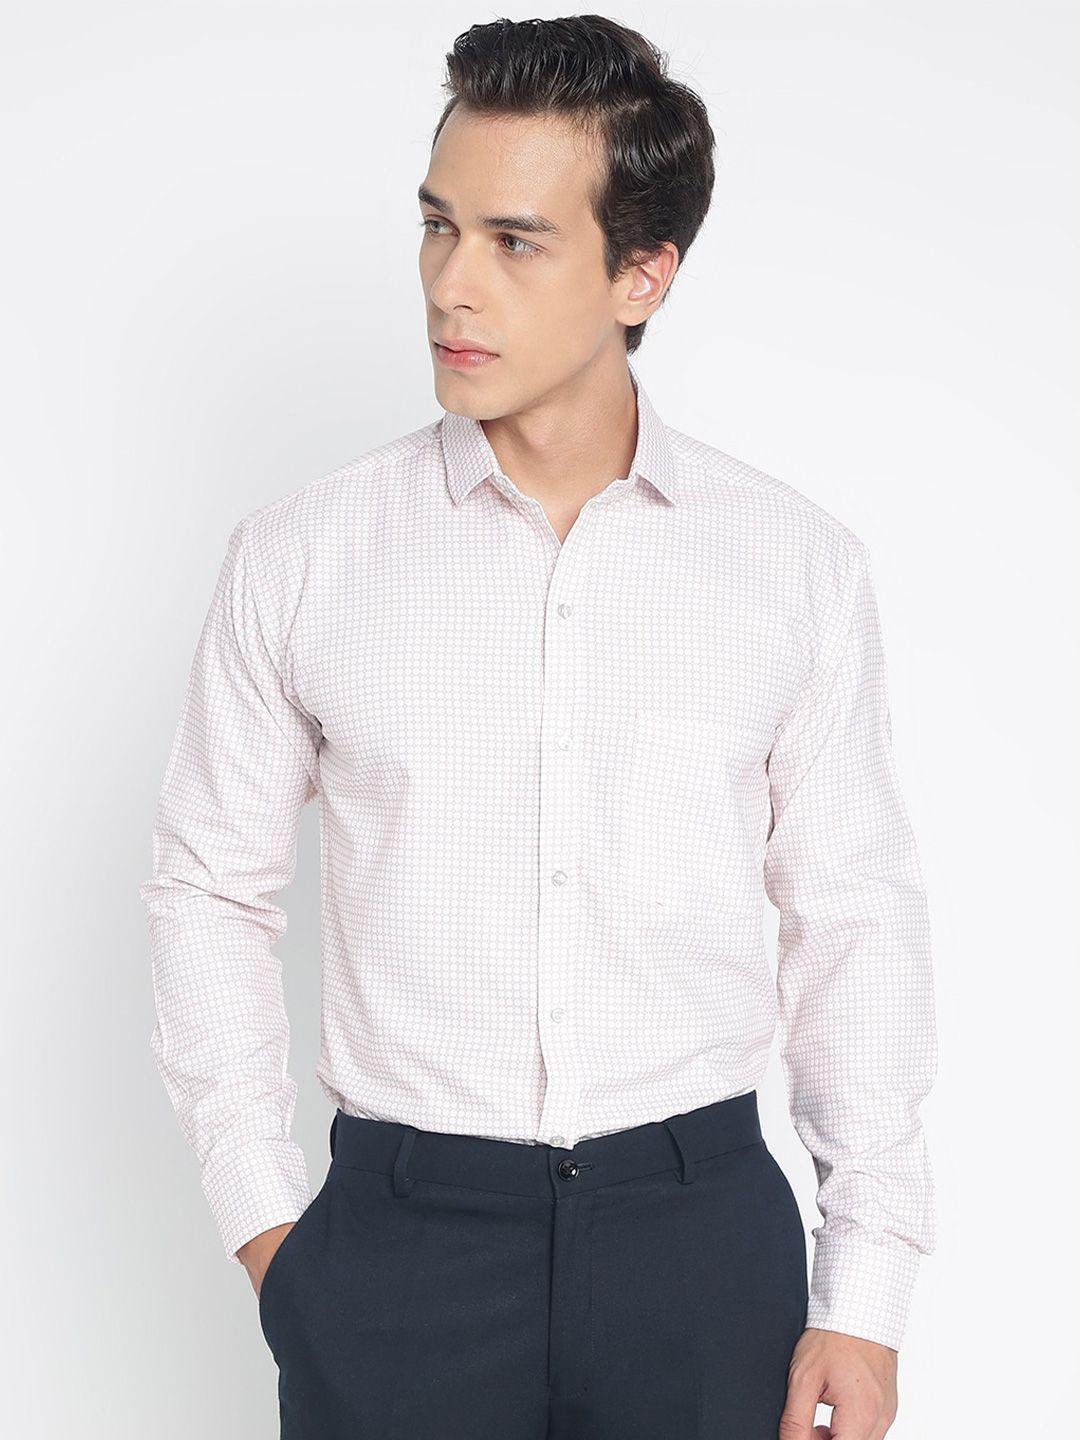 colorwings comfort checked formal shirt